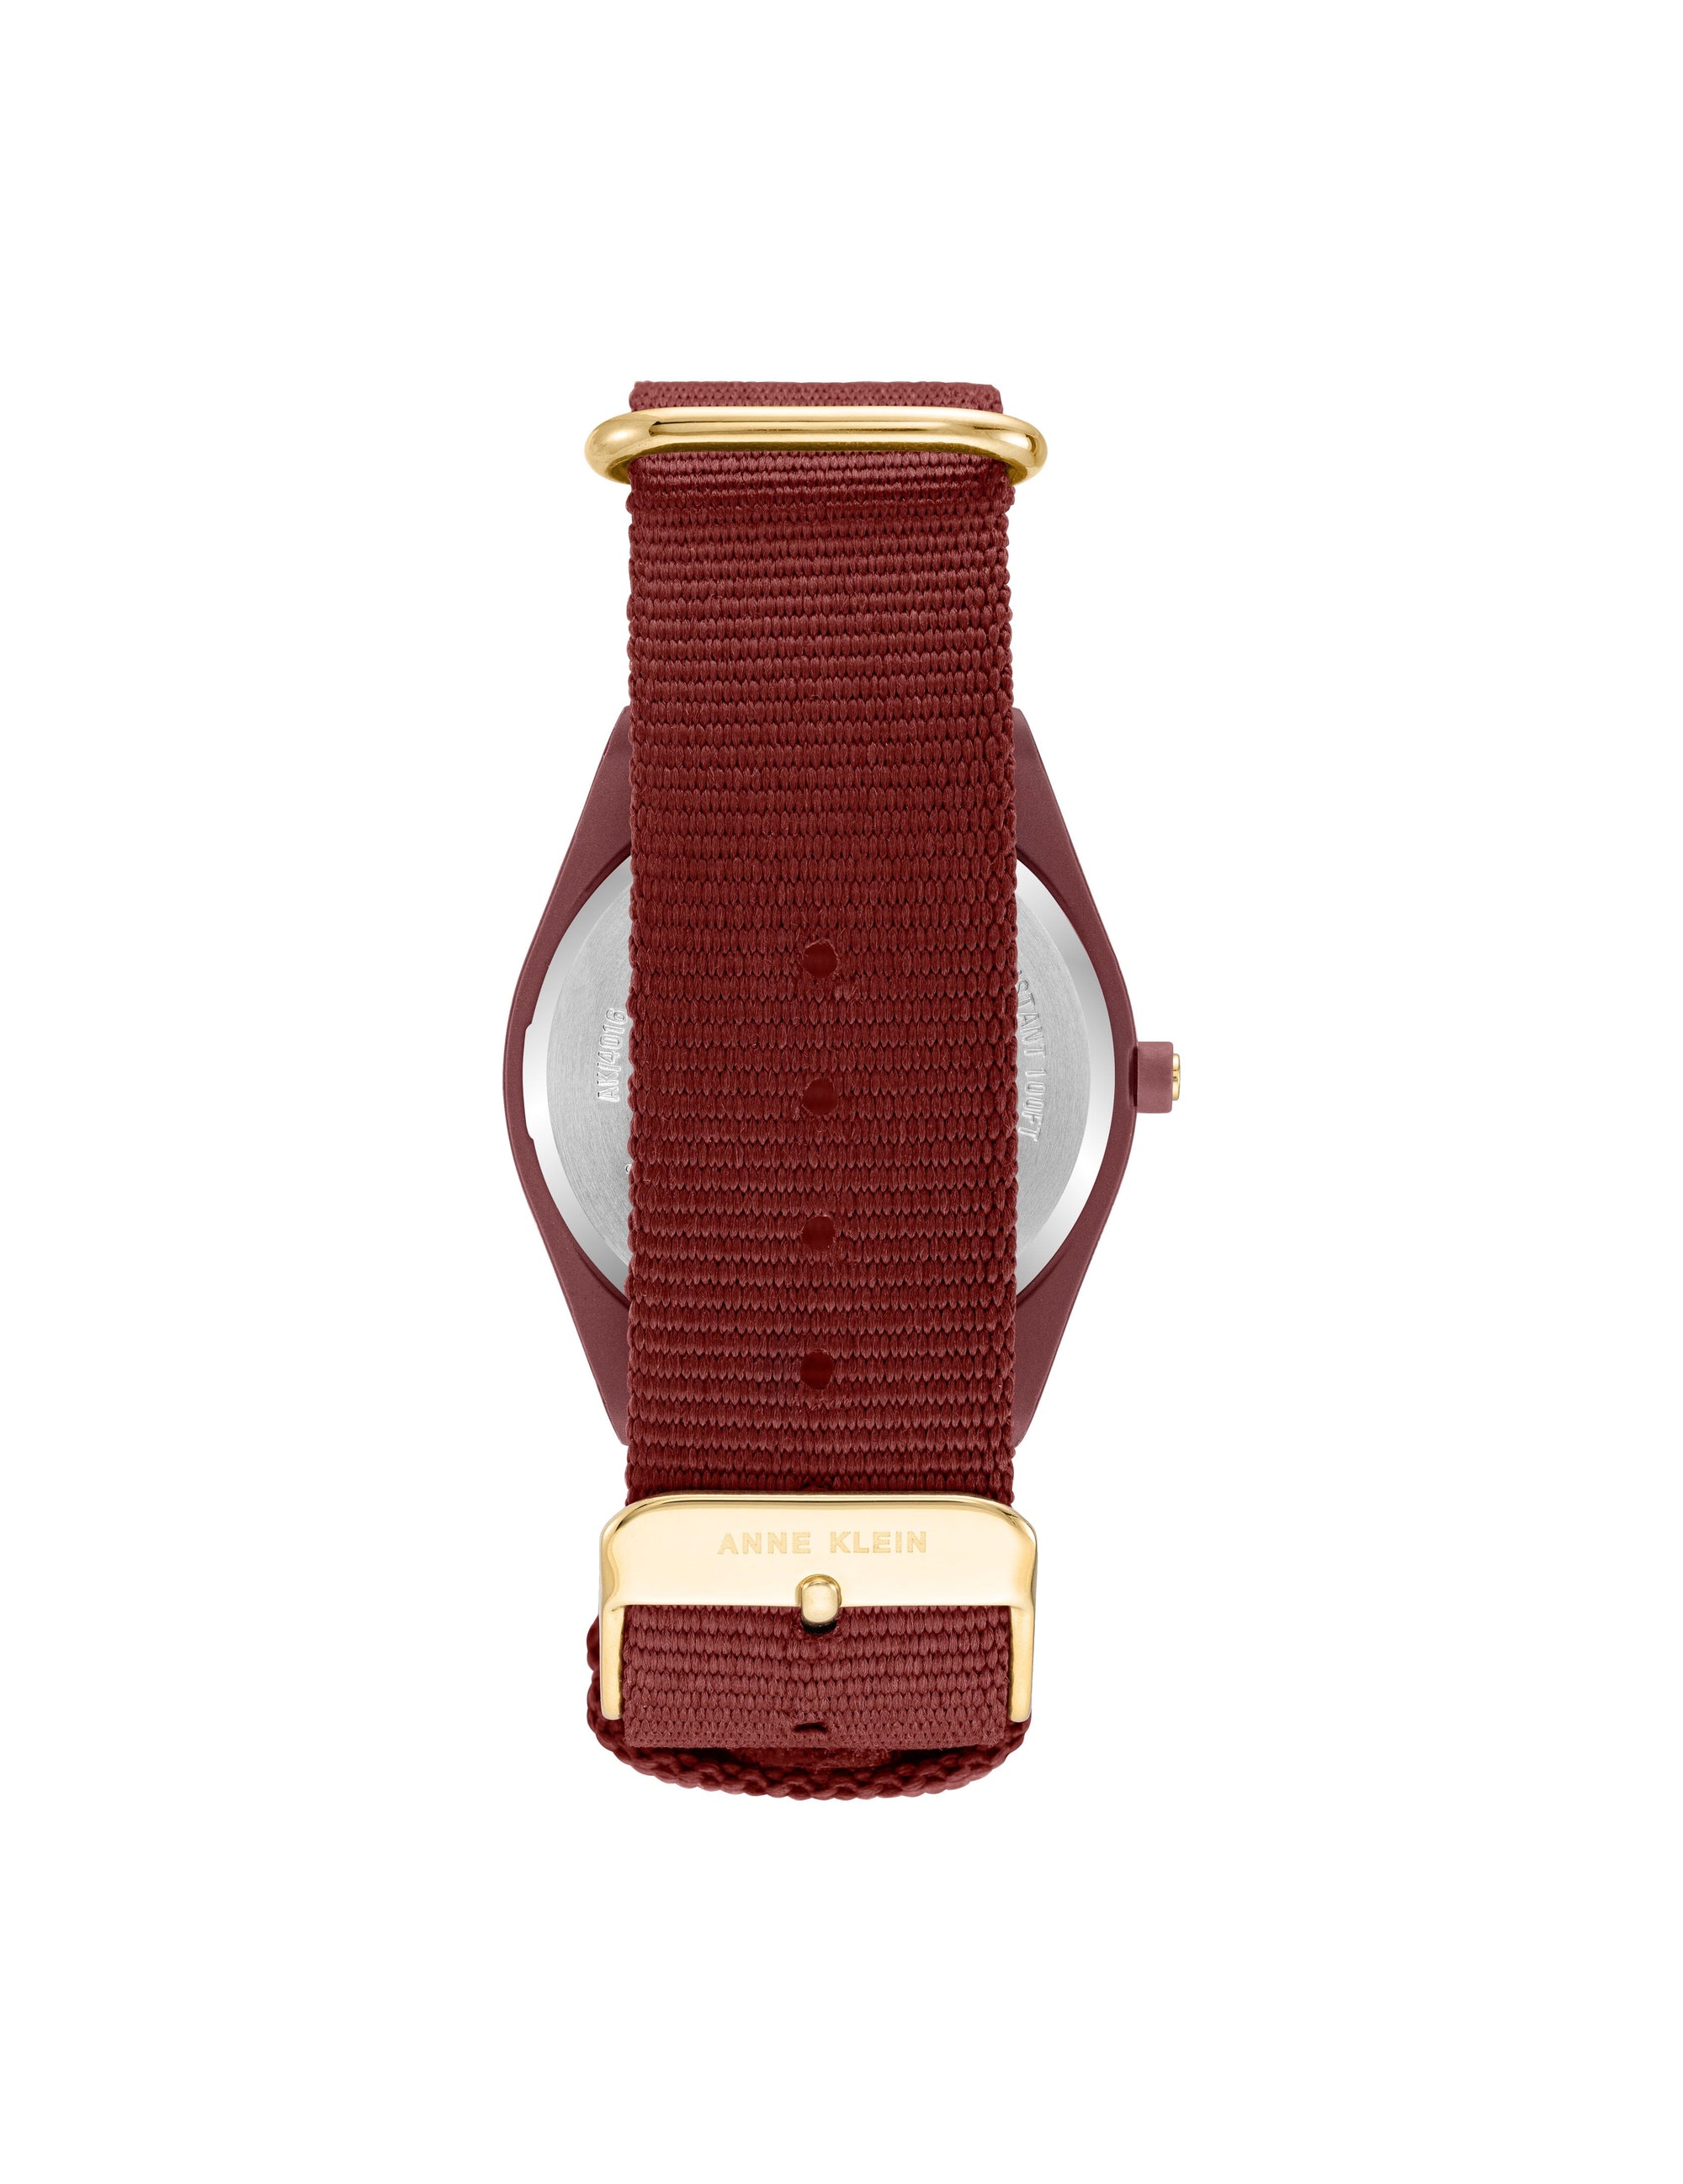 Anne Klein Gold-Tone/ Red Consider It Solar Recycled Ocean Plastic Woven Strap Watch